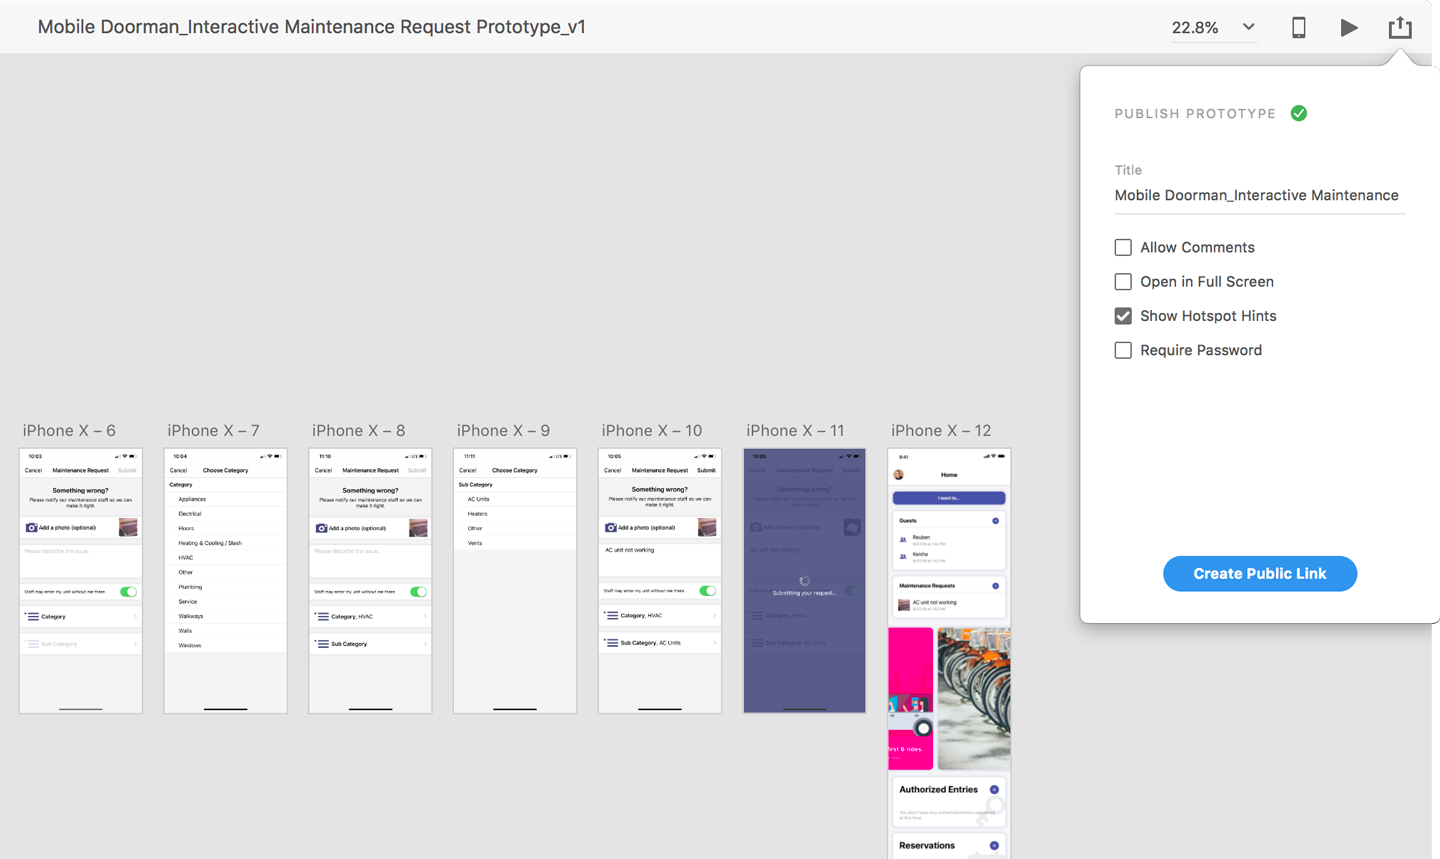 A screenshot of Adobe XD's Publish Prototype feature.